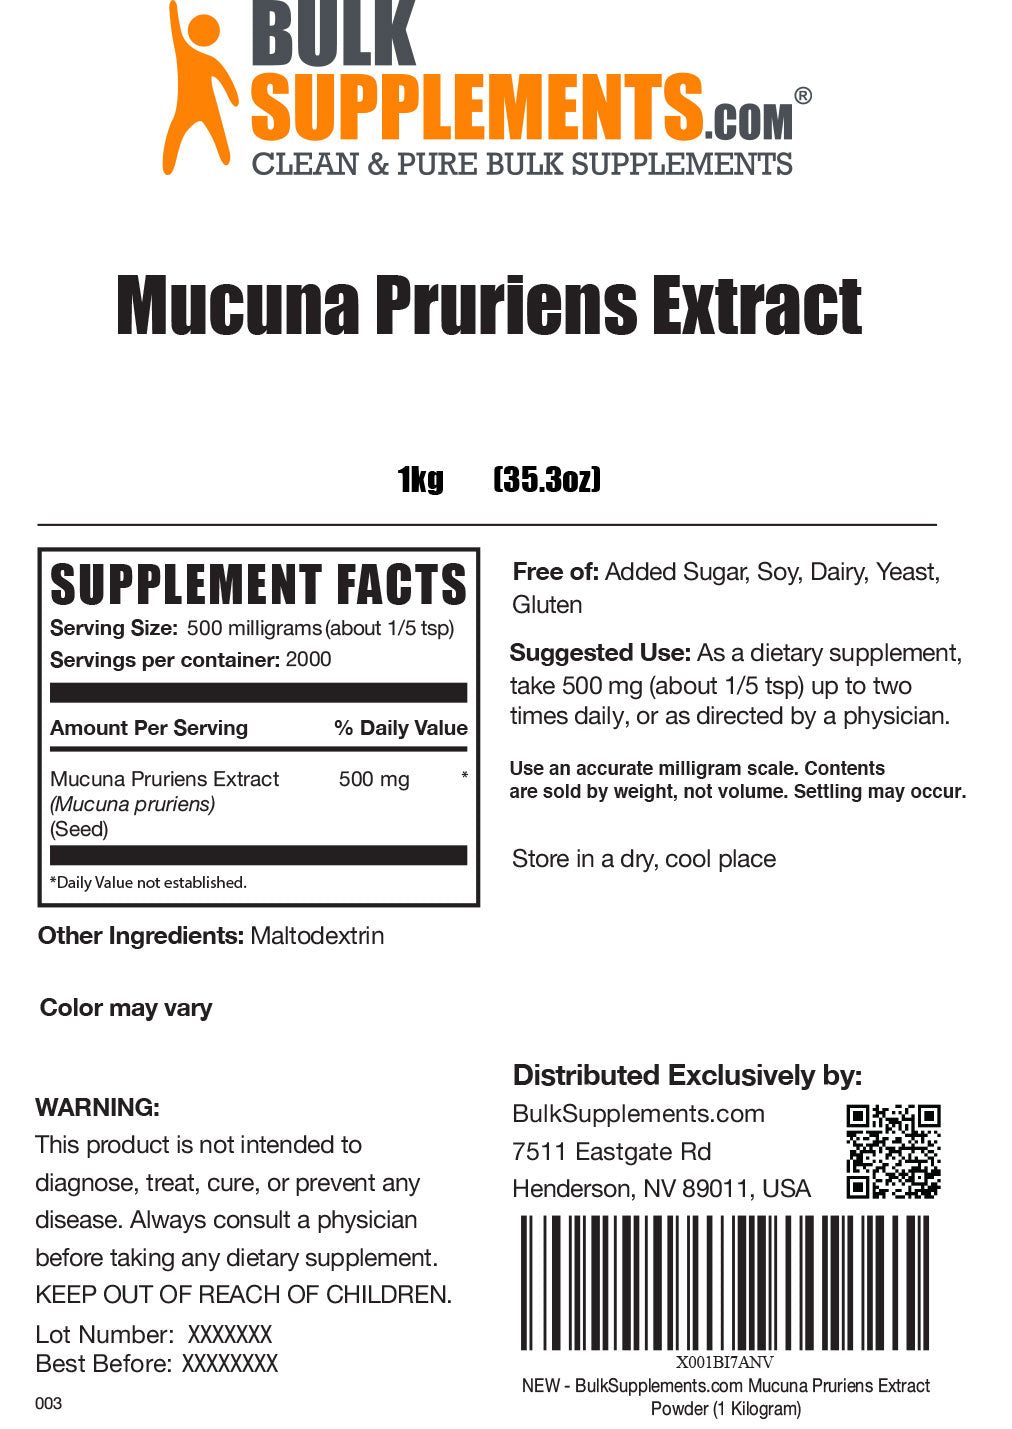 Supplement Facts for Mucuna Pruriens Extract